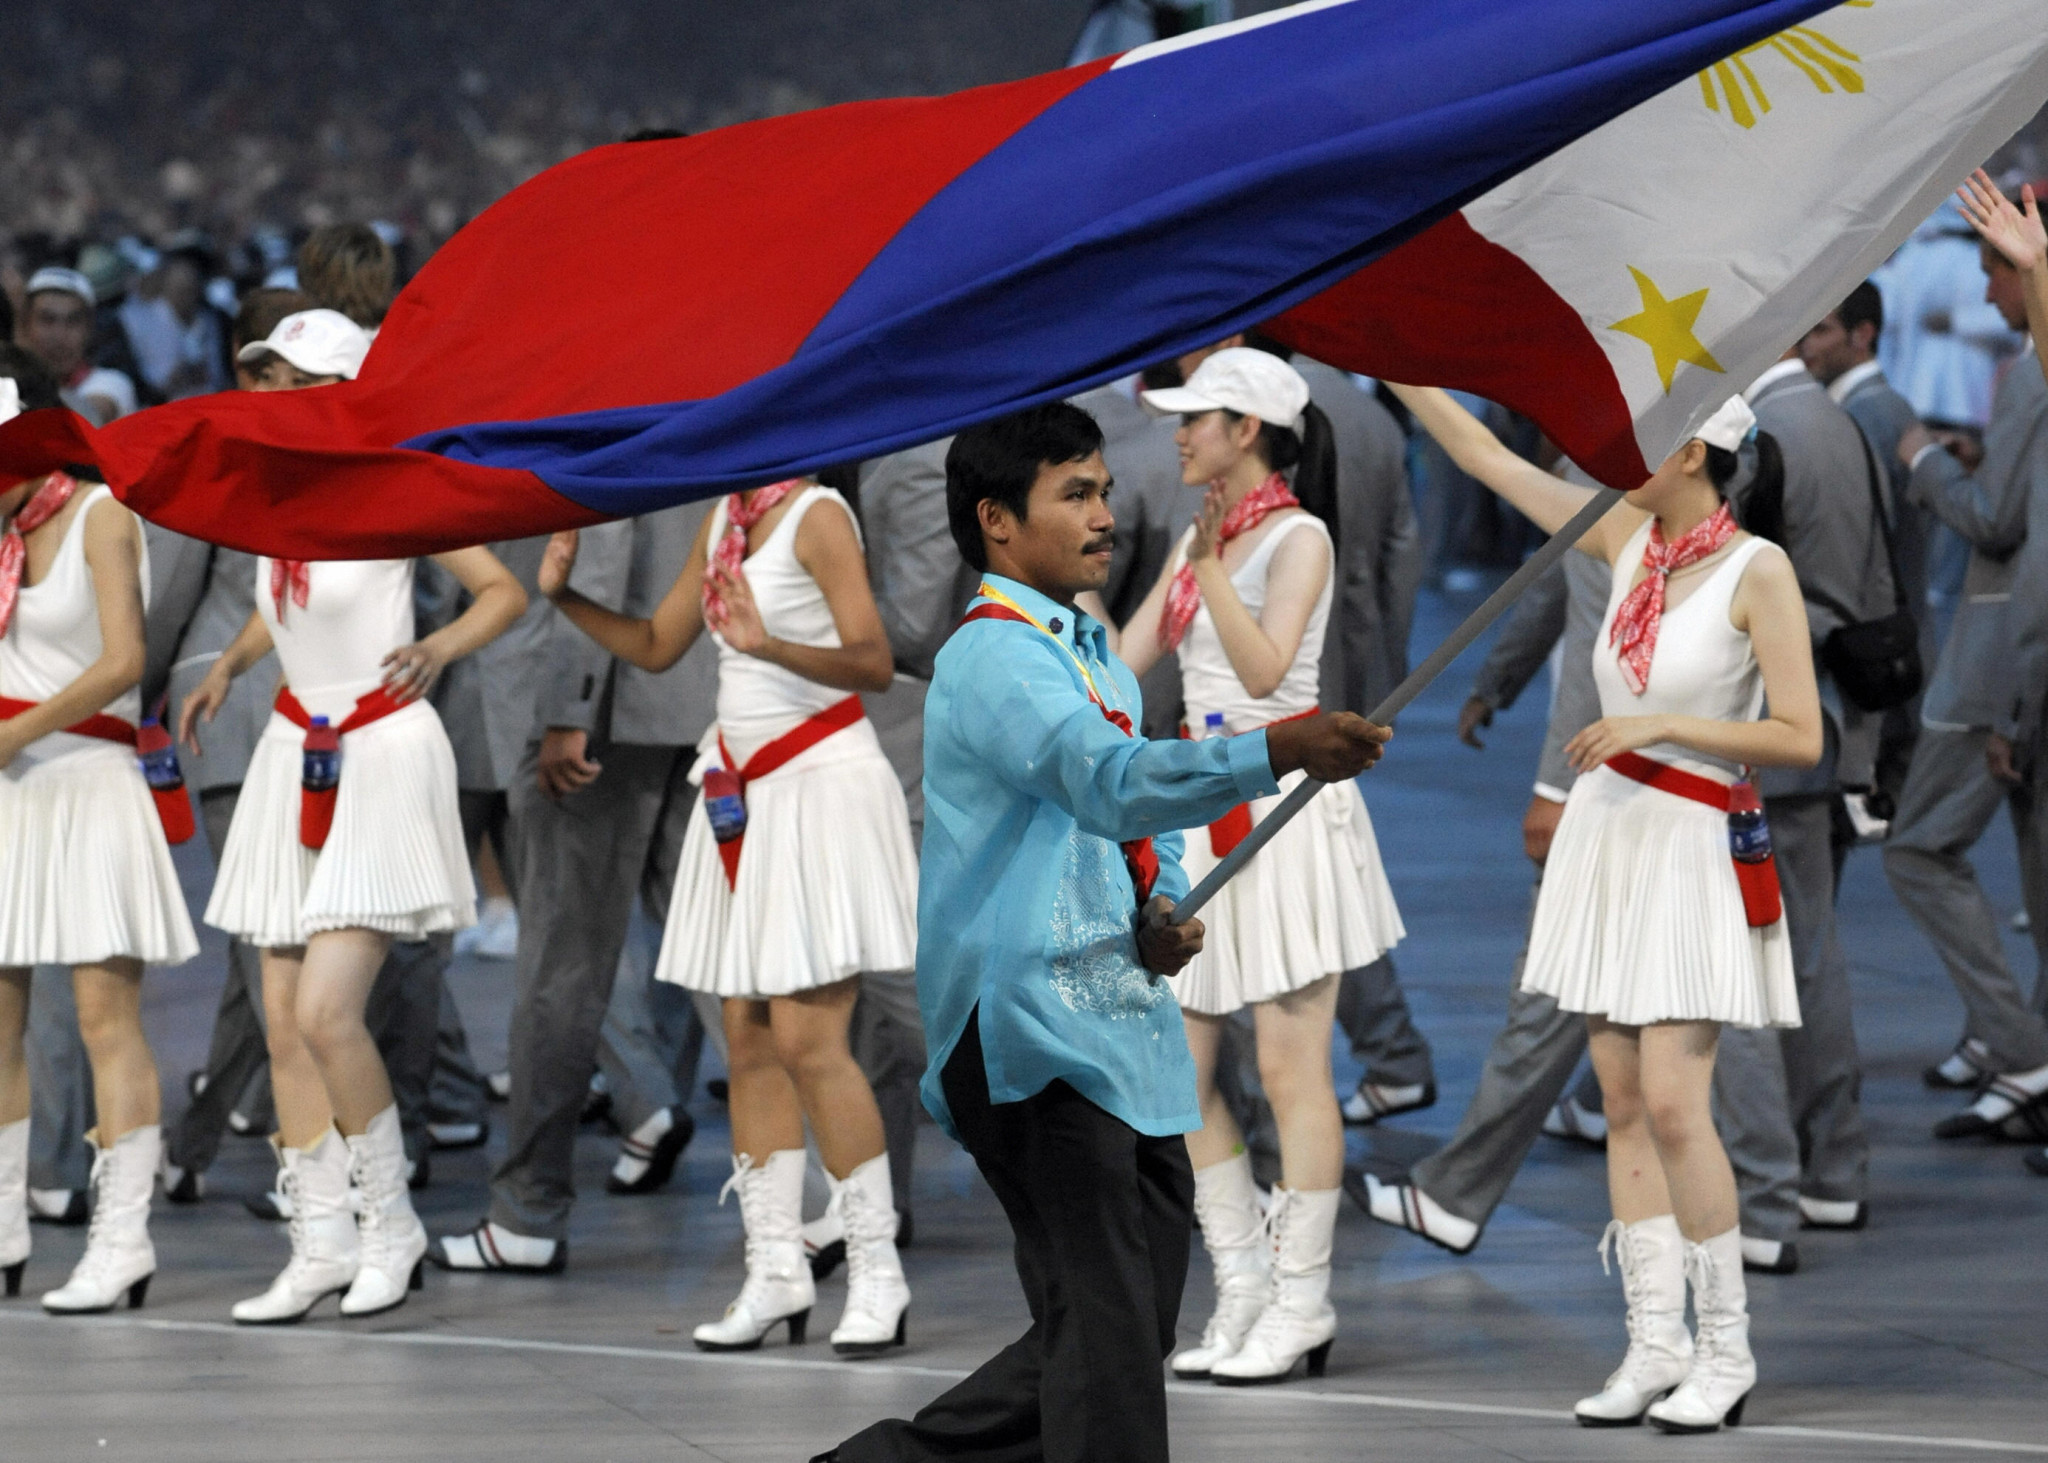 Manny Pacquiao was the Filipino flagbearer at Beijing 2008, despite not competing ©Getty Images